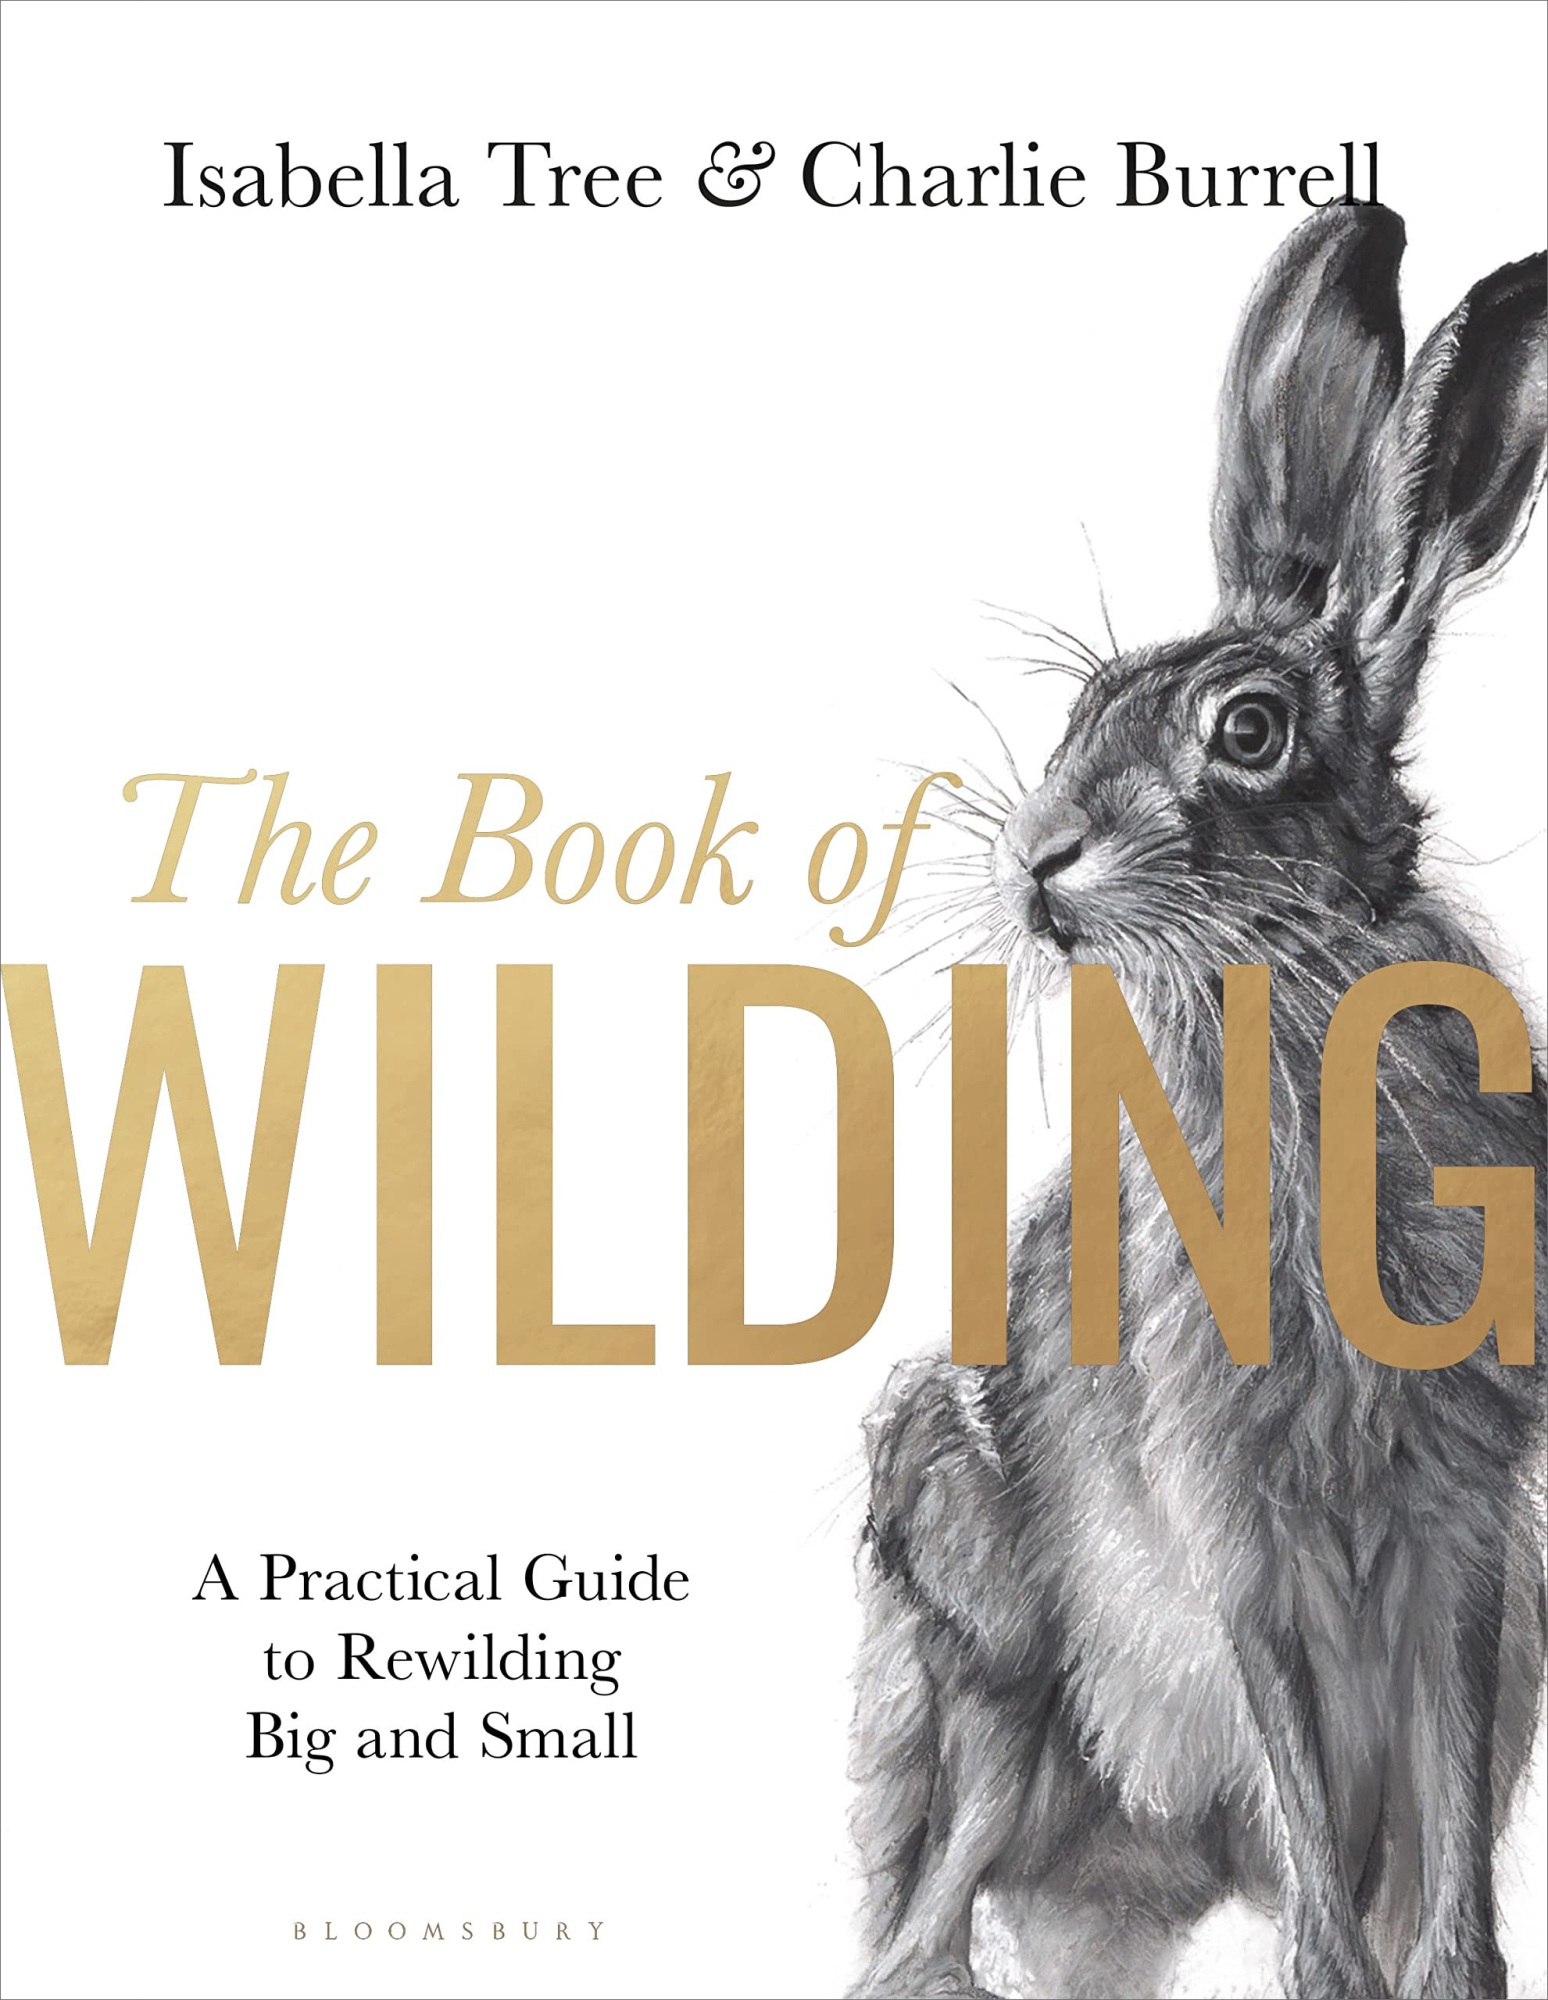 cover of "The Book of Wilding"